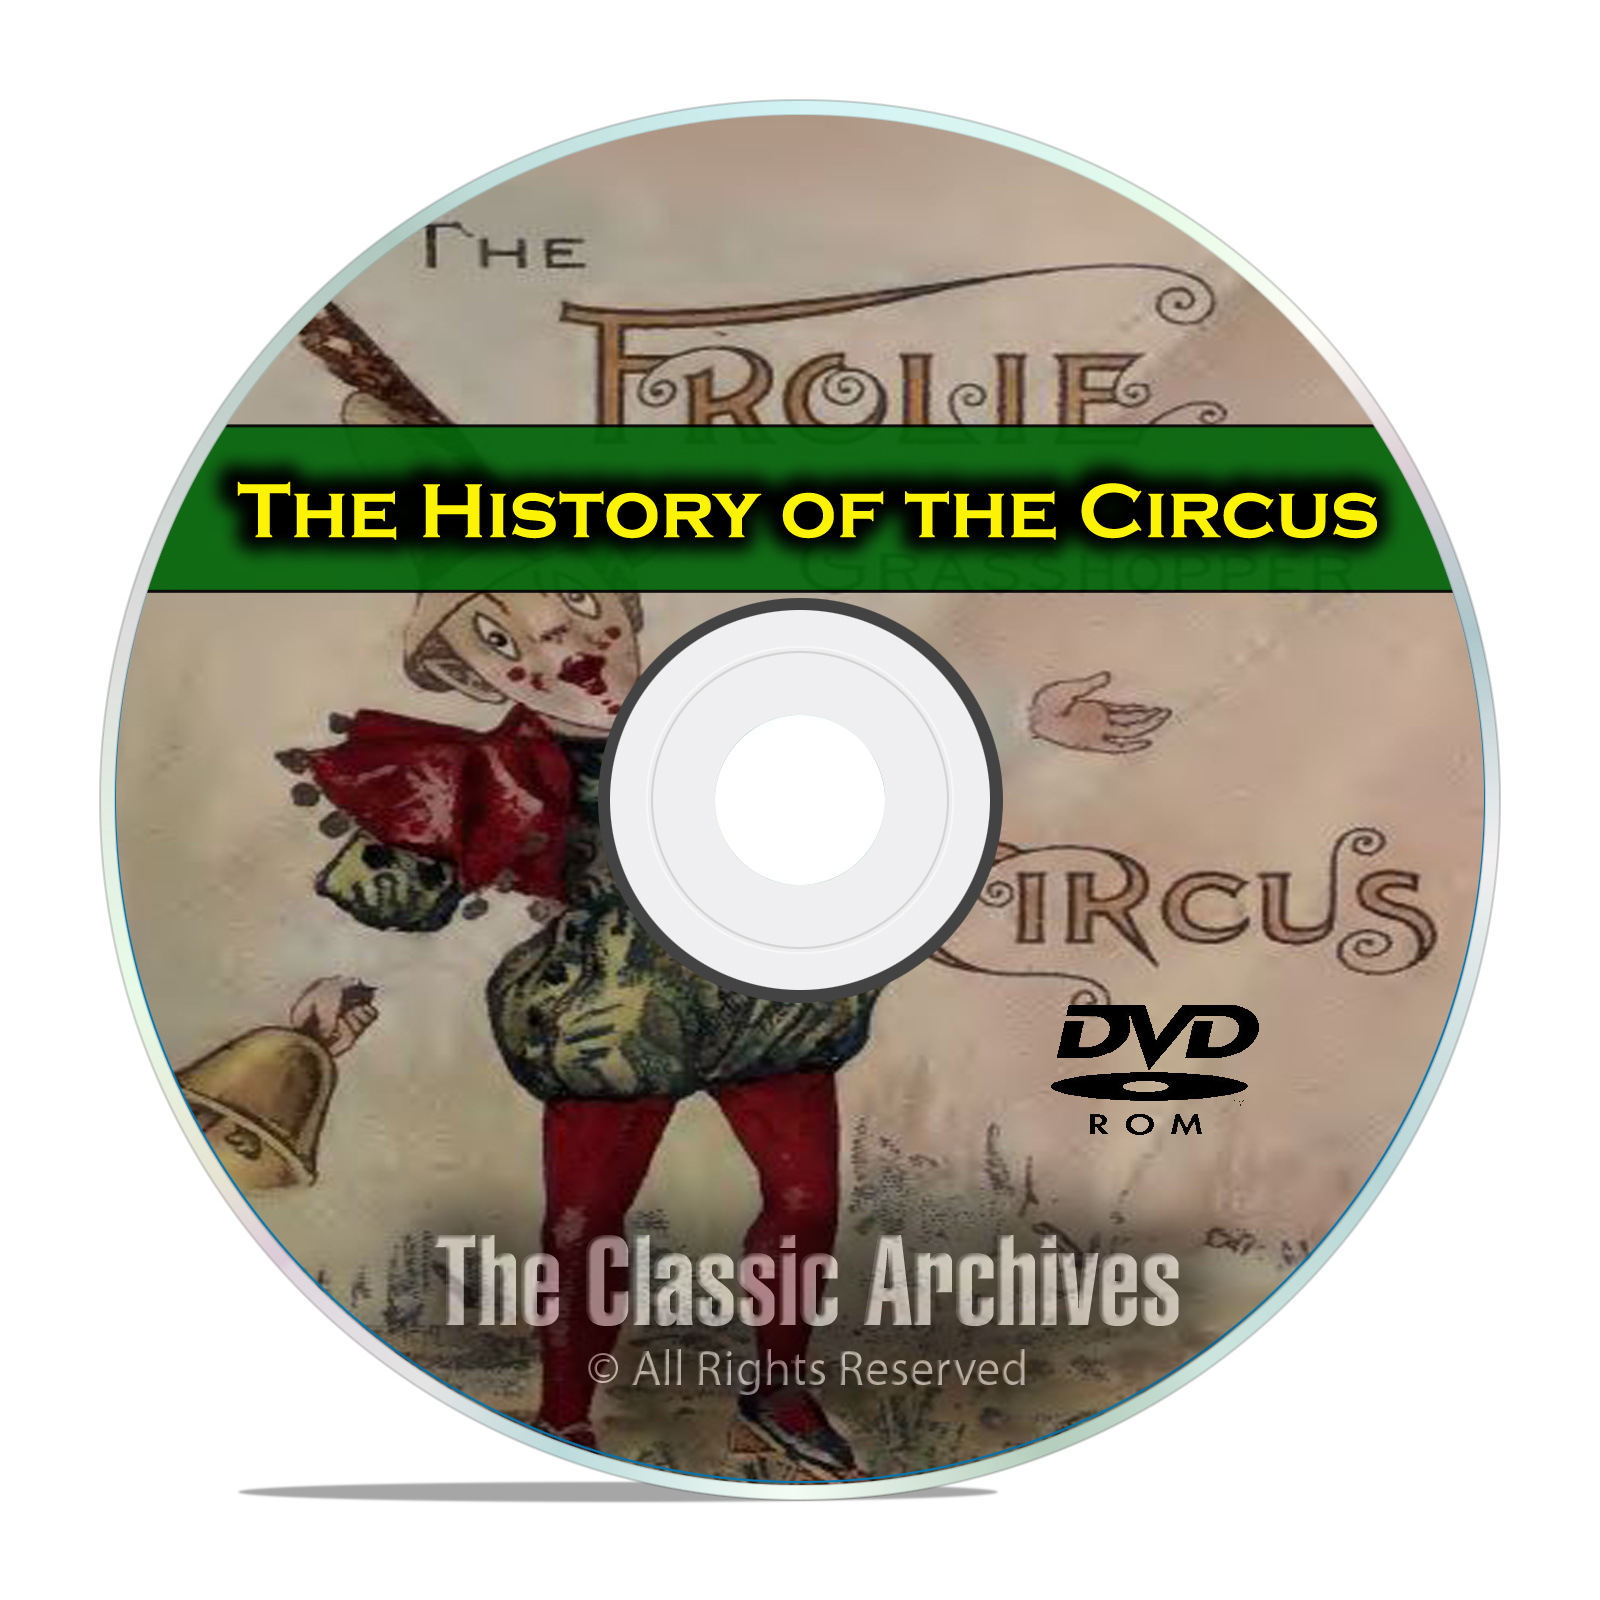 The History of the Circus, Ringling Brothers Barnum Bailey, Posters PDF DVD